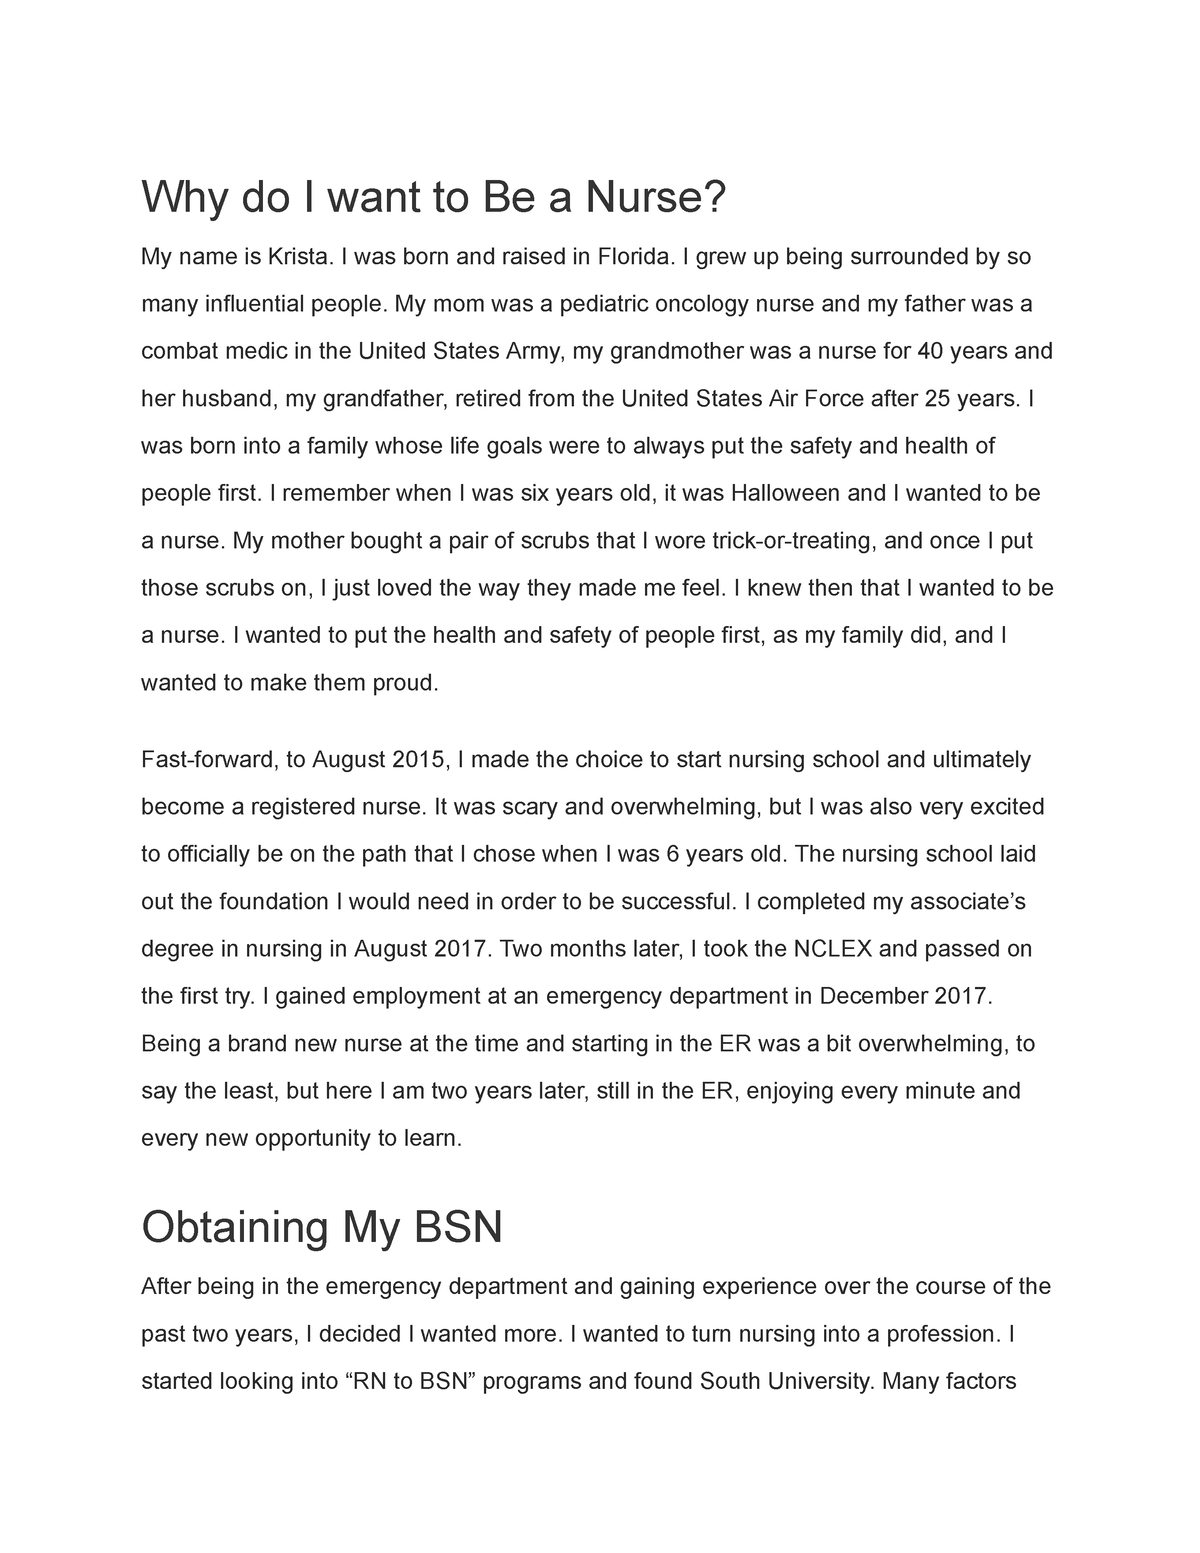 1000 word essay on why i want to be a nurse